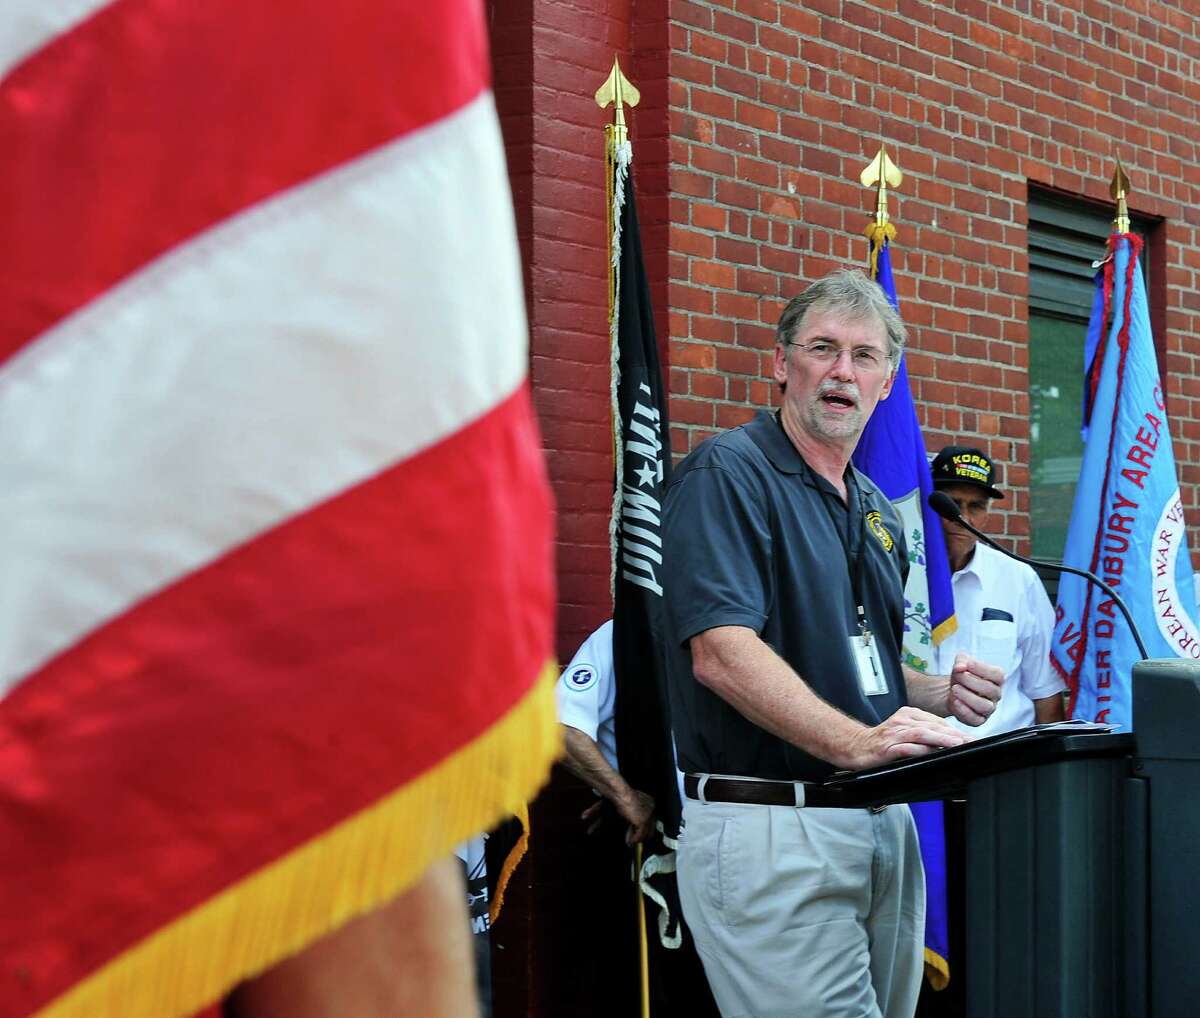 Thomas Quinn, of the U.S. Department of Vereran Affairs, is the guest speaker, as the Veterans Walkway of Honor dedication ceremony takes place at the Danbury War Memorial, in Danbury, Conn. Sunday, July 14, 2013.